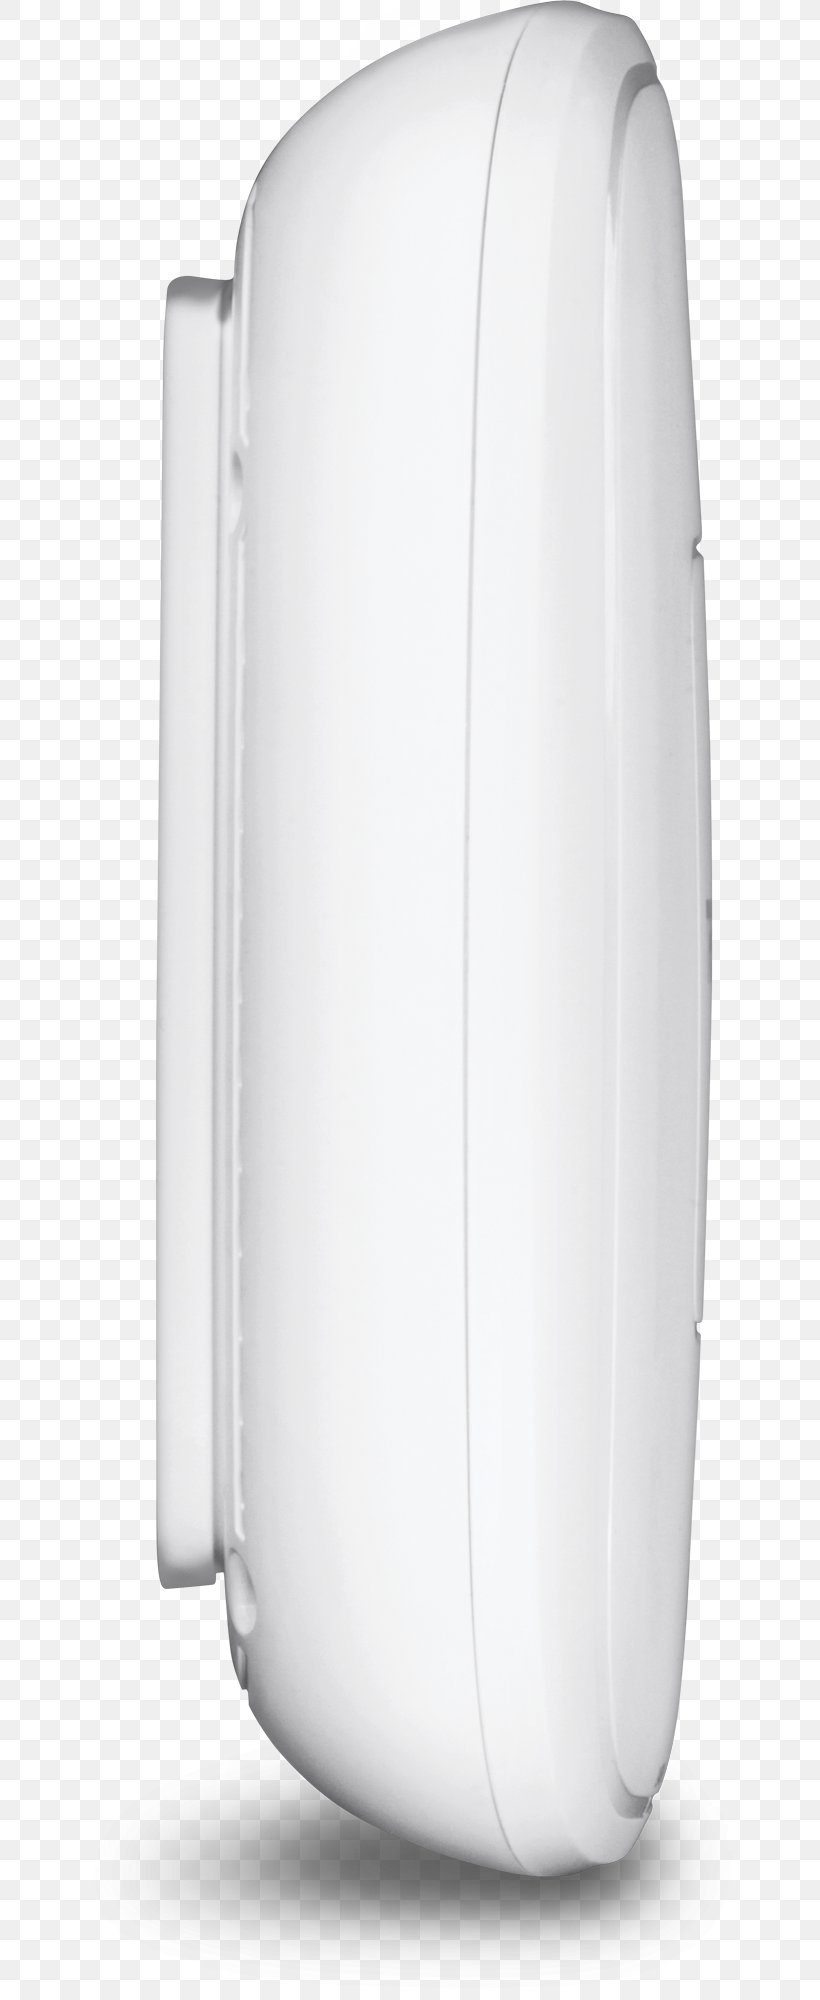 Wireless Access Points TEW-740APBO Trendnet Wireless Distribution System Wi-Fi IEEE 802.11n-2009, PNG, 673x2000px, Wireless Access Points, Beamforming, Bridging, Client Mode, Computer Network Download Free